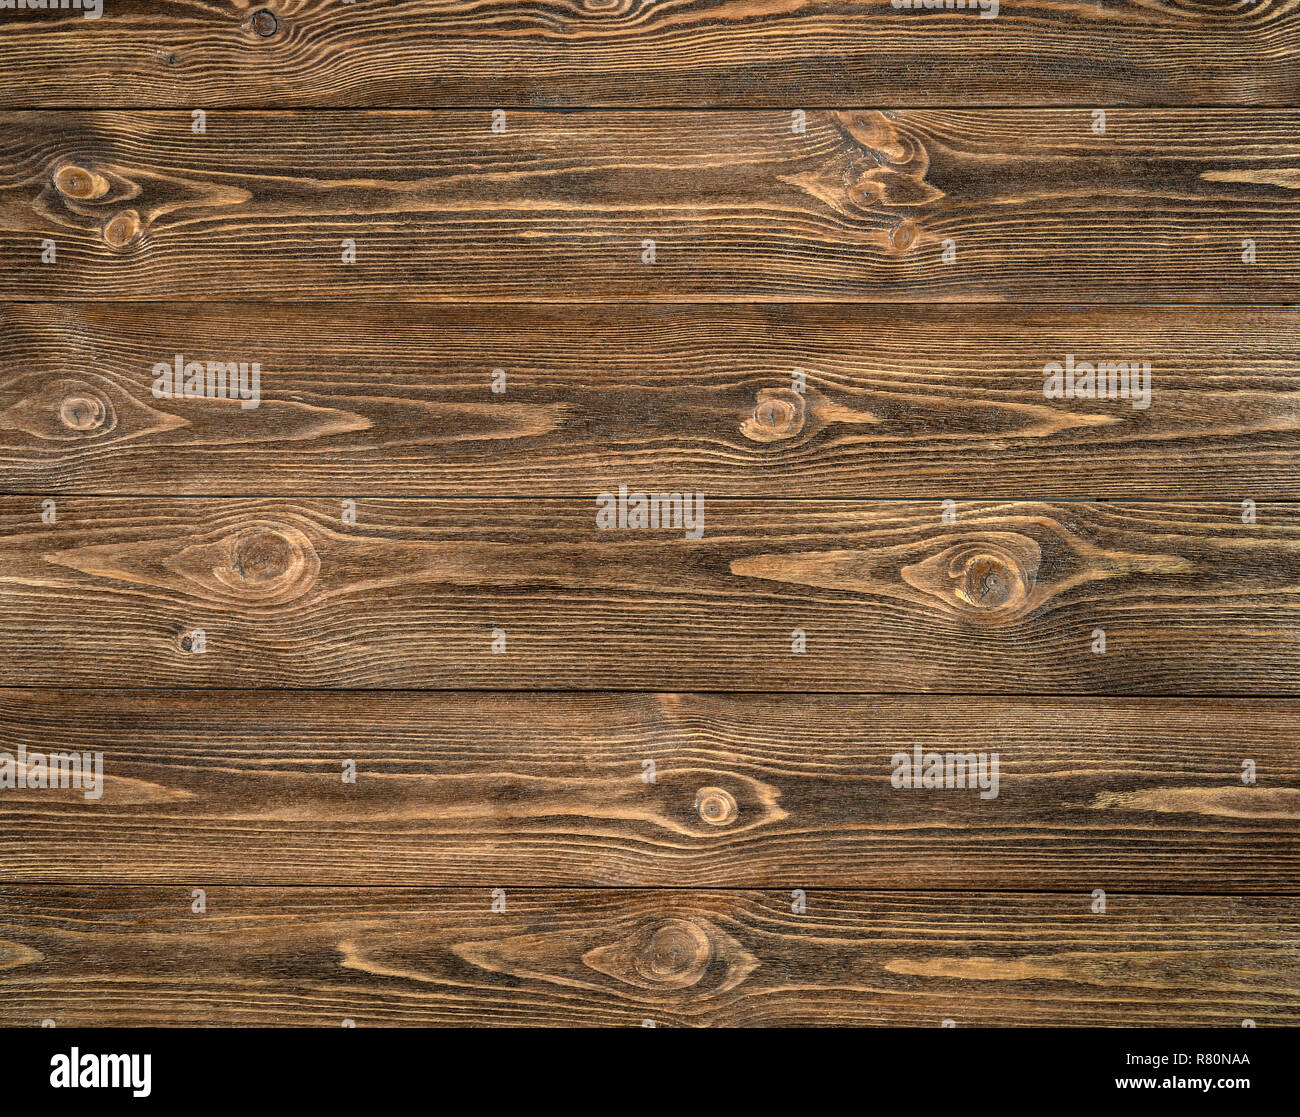 Cracked boards. Wood planks background, texture in abstract style